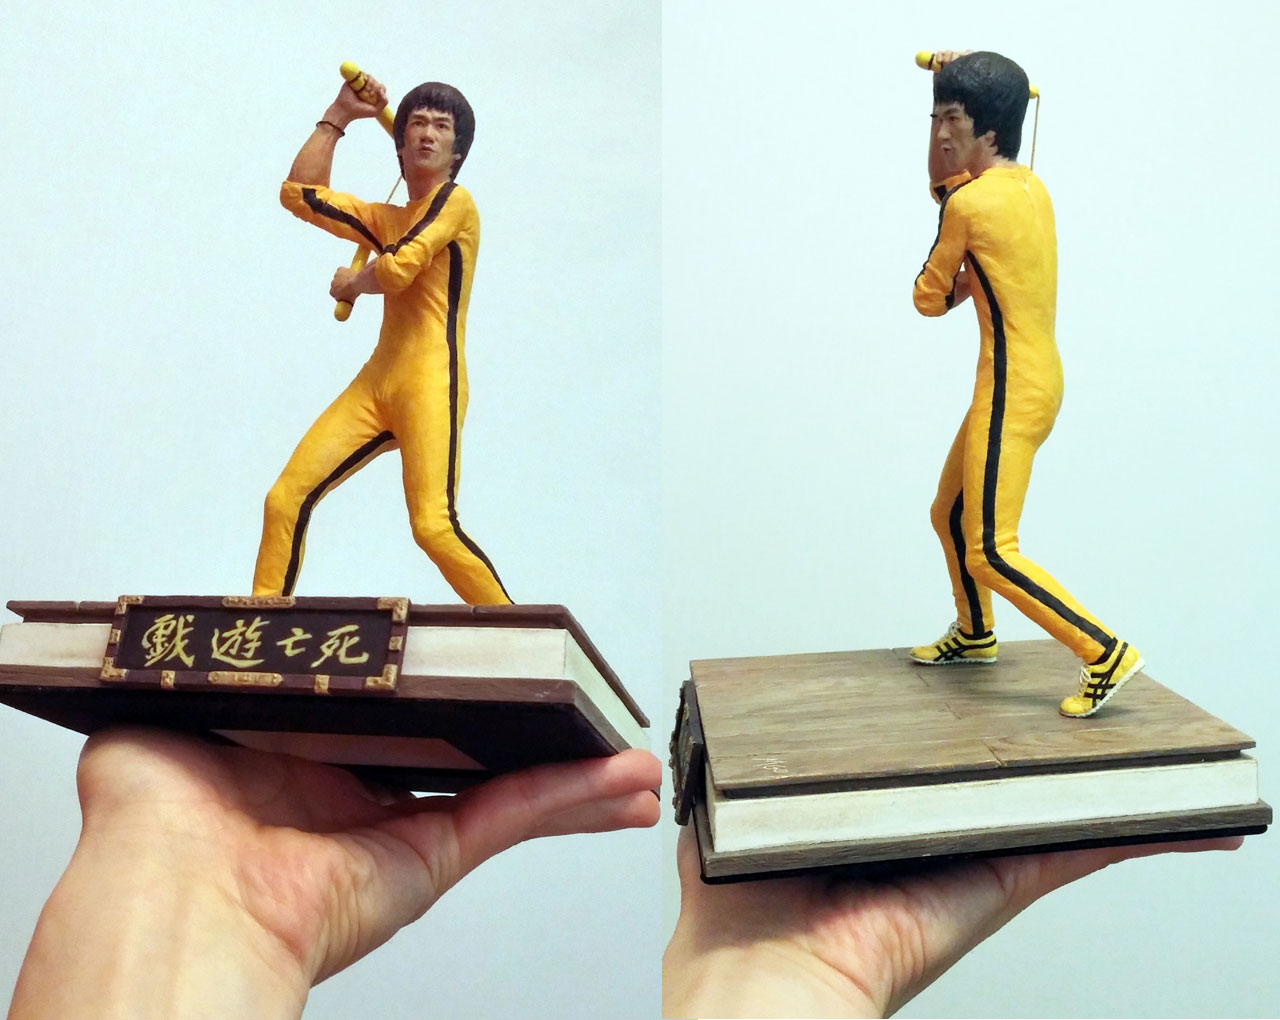 Two full body images of the completed miniature statue Hai Tien of Game of Death with nunchaku and base